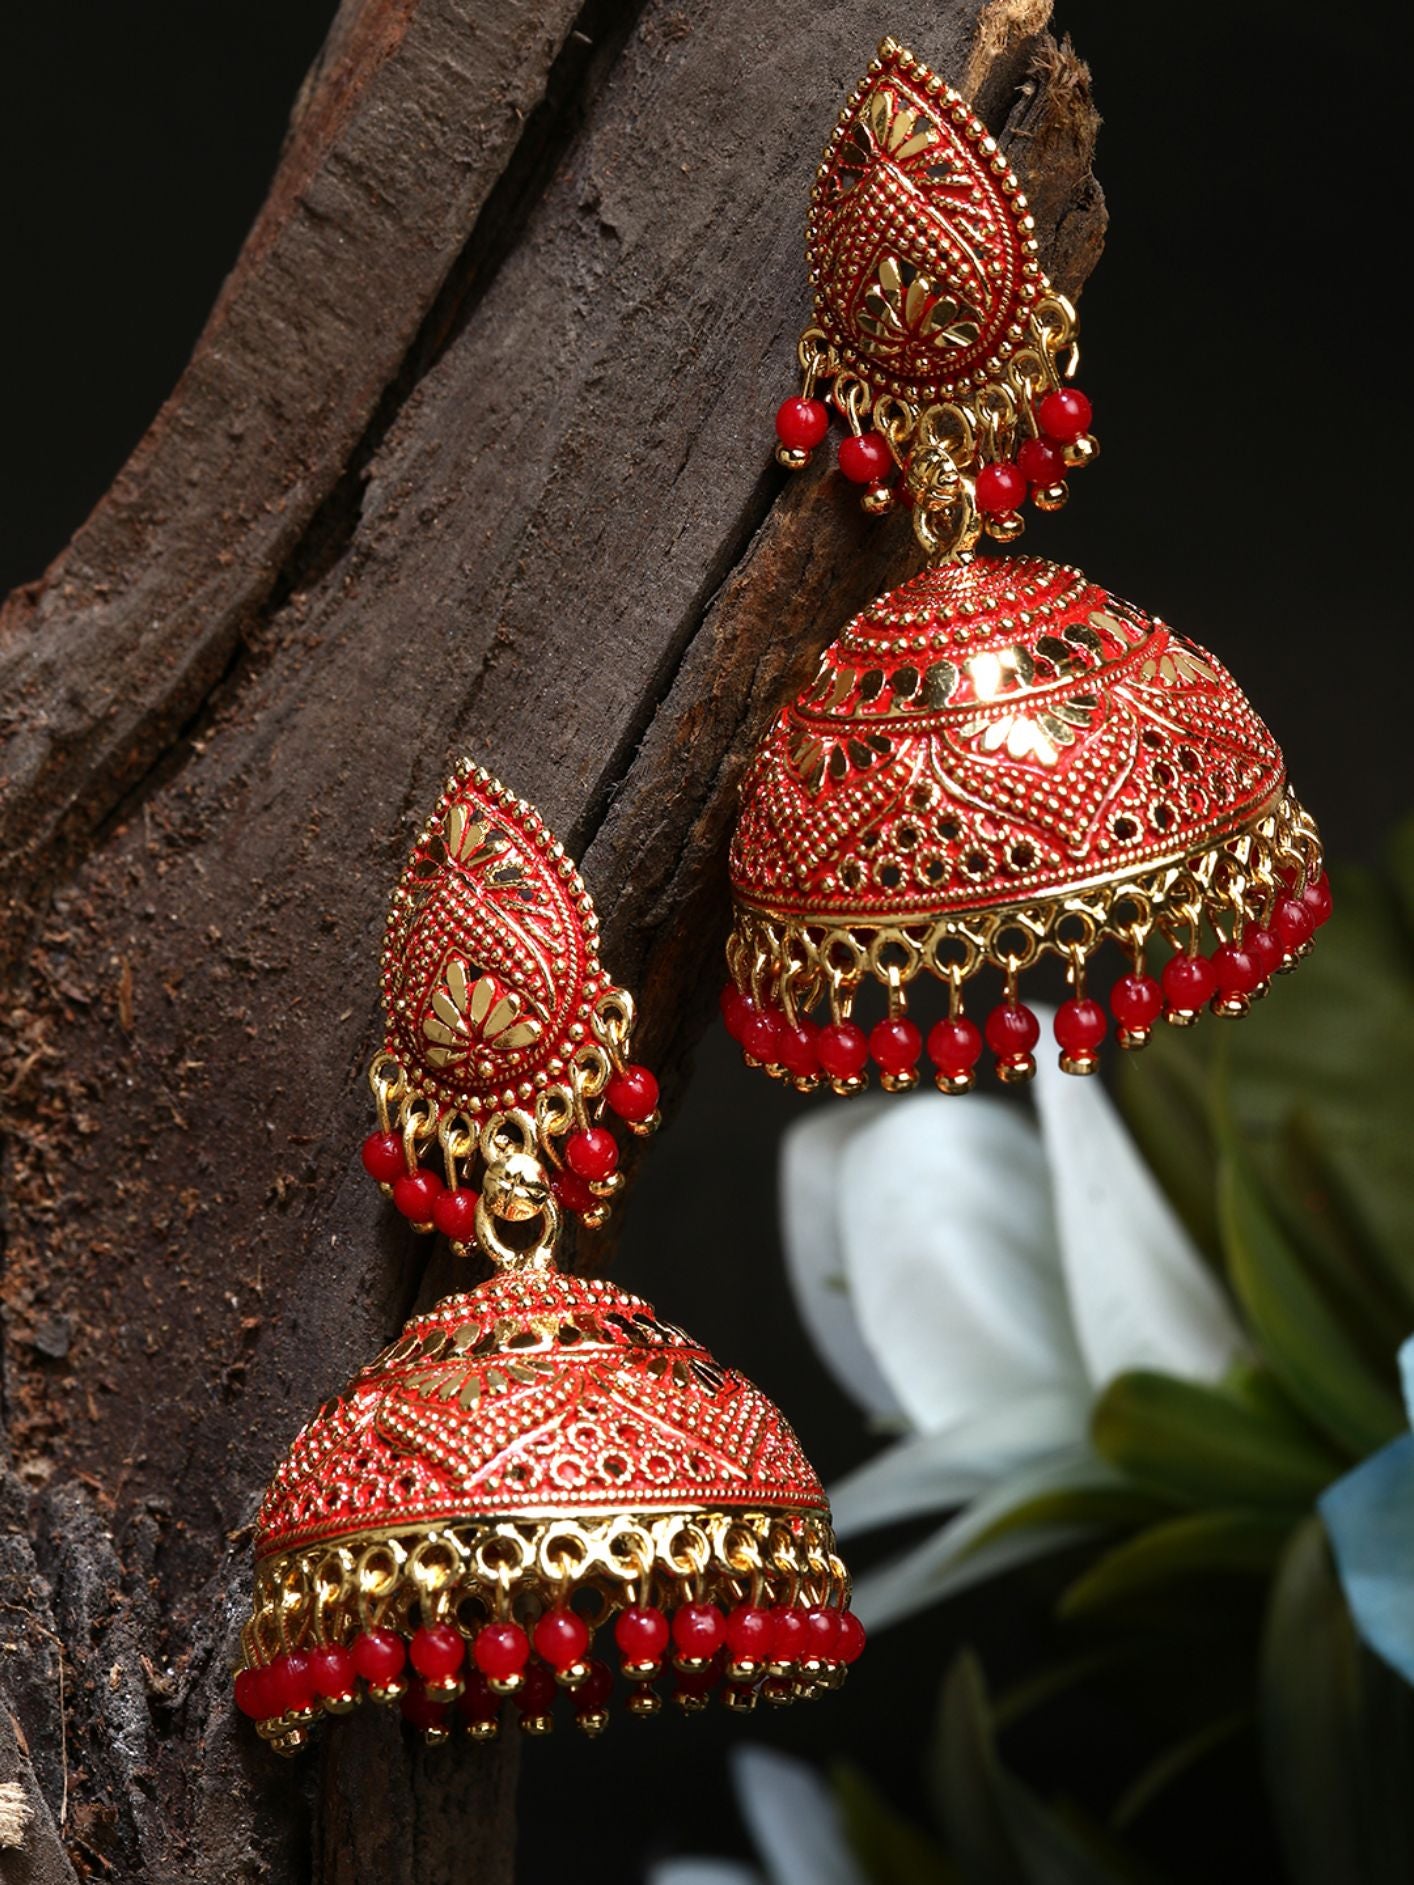 Women's Gold Plated & Red Dome Shaped Enamelled Jhumkas - Anikas Creation